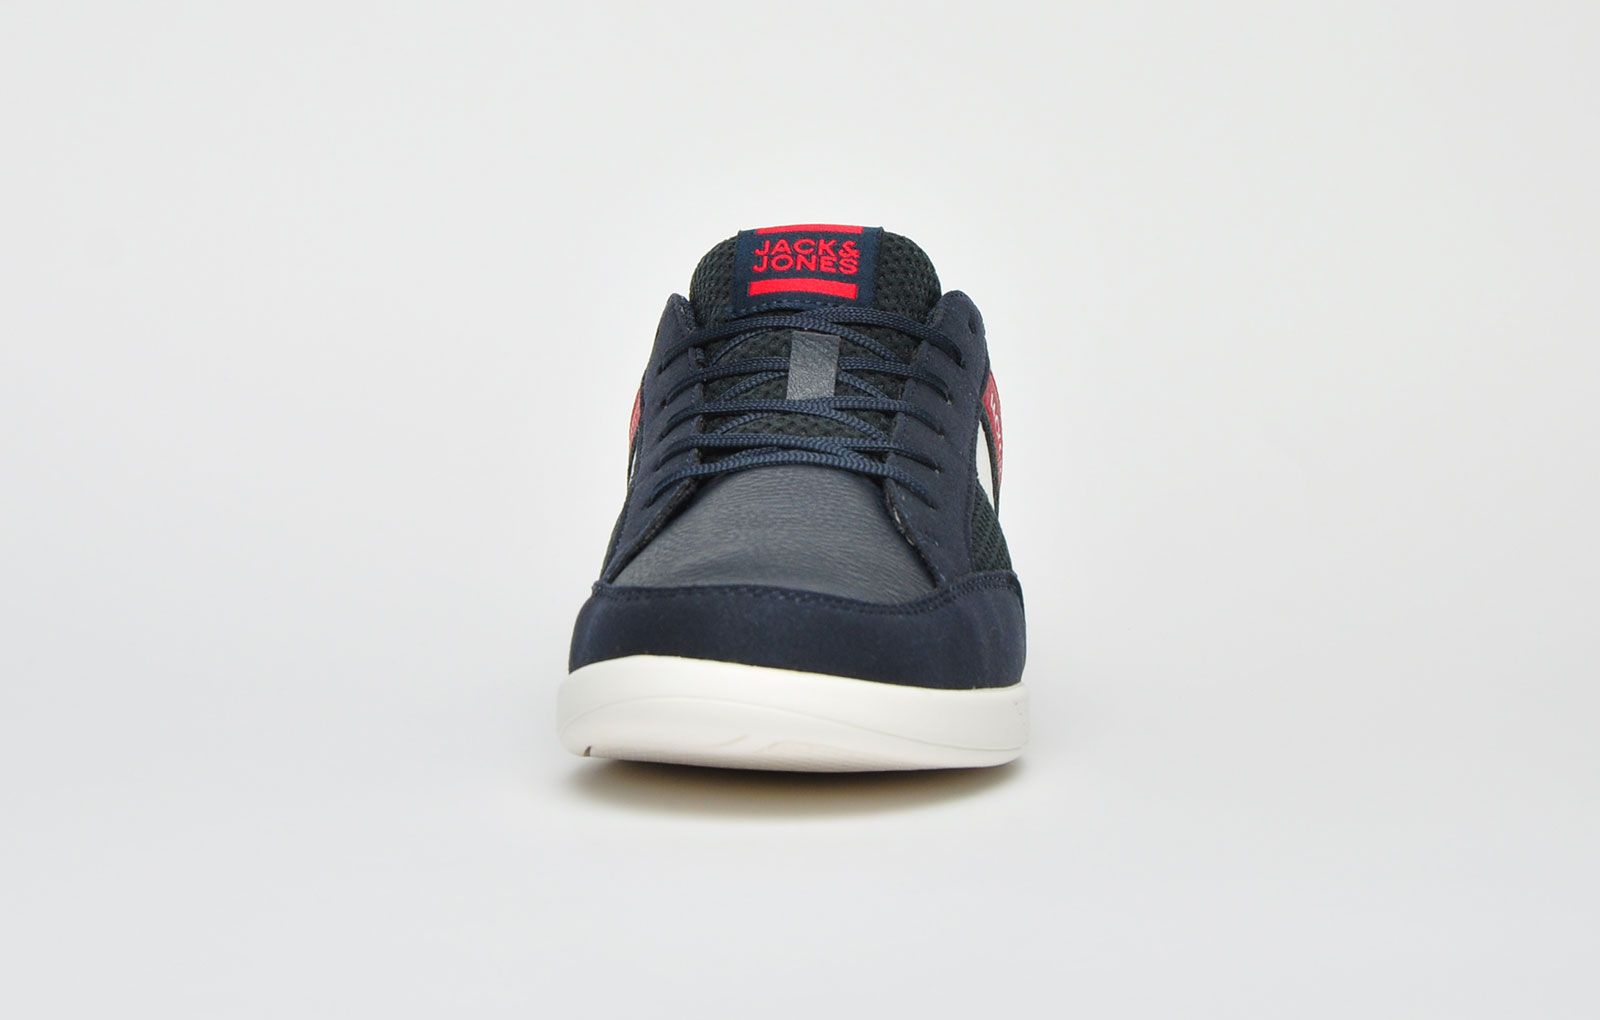 <p>Featuring a navy synthetic upper with designer stitch detailing throughout, complete with Jack & Jones branding for true brand appeal. These men’s trainers from Jack & Jones can be matched up with your favourite outfit, featuring a durable rubber outsole and a full lace up fastening for a secure lockdown fit with the iconic Jack & Jones branding to the side for a 5-star premium designer finish. Add an eye-catching trainer to your collection now. <br></p> <p class=